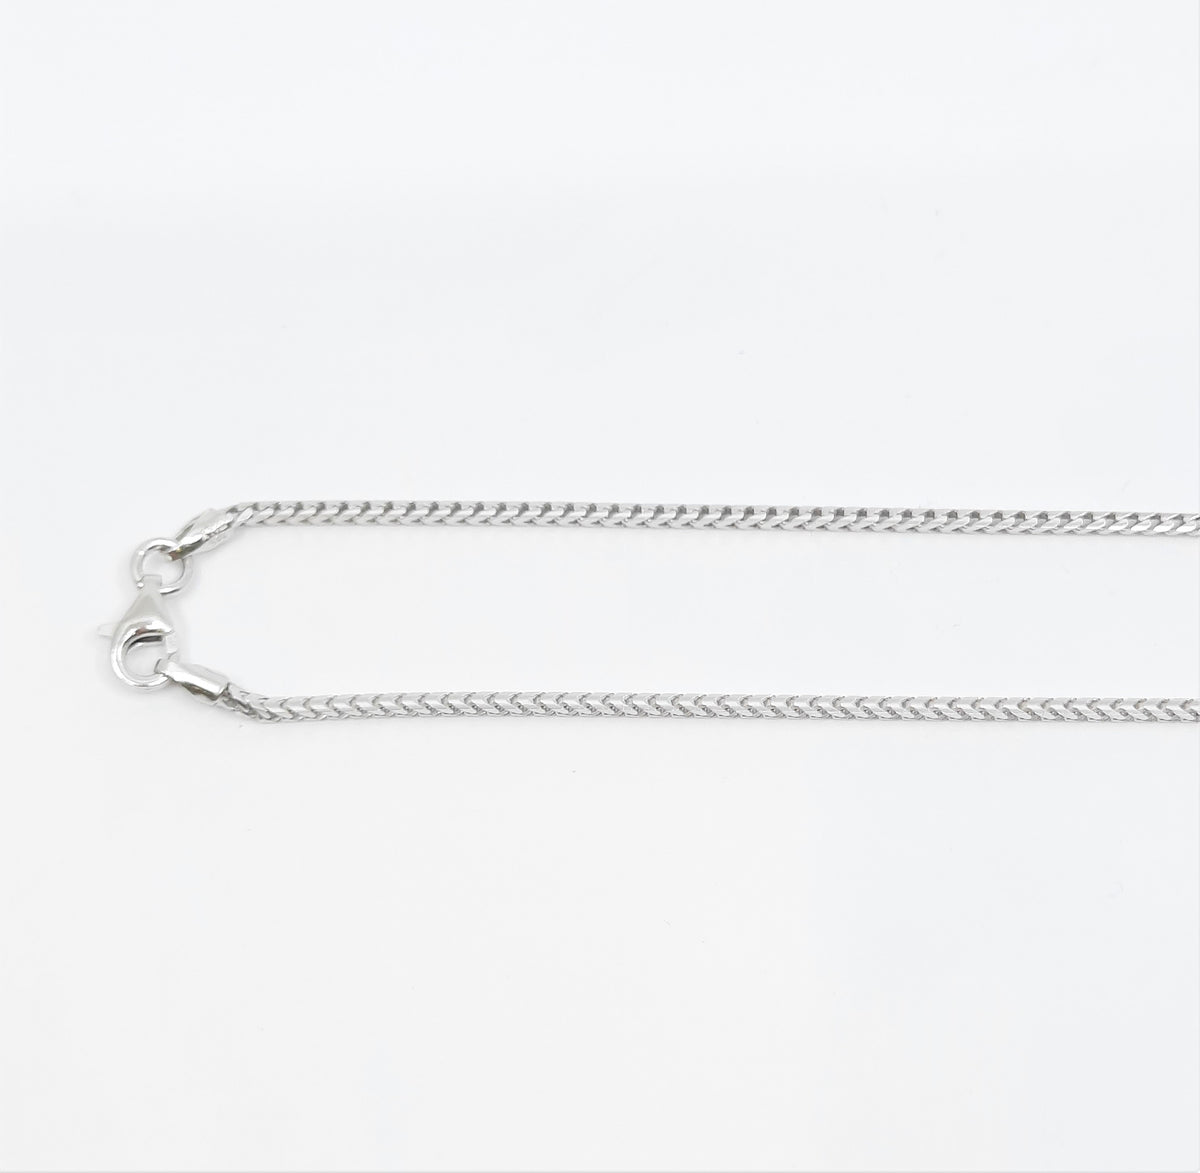 925 Sterling Silver 1.4mm Rhodium Plated Franco Chain with Lobster Clasp - 20 Inches